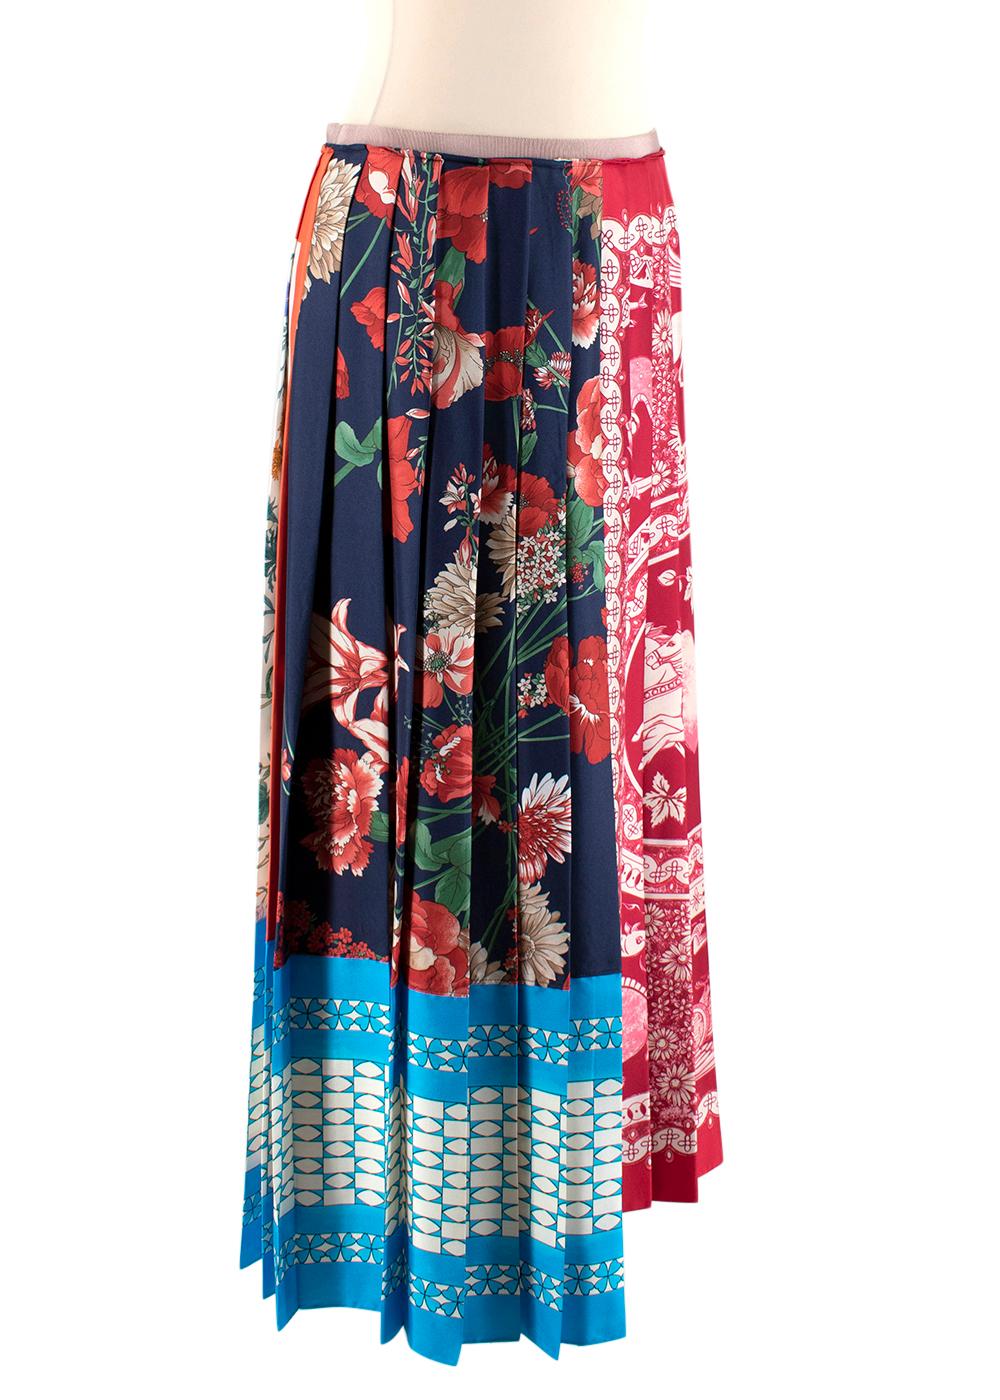 Gucci Patchwork Print Pleated Asymmetric Silk Skirt

- Made of luxurious soft silk 
- Pleated texture 
- Gorgeous scarf patchwork motif 
- Snap fastening 
- Timeless versatile design 

Materials:
100% silk 

Made in Italy 

PLEASE NOTE, THESE ITEMS